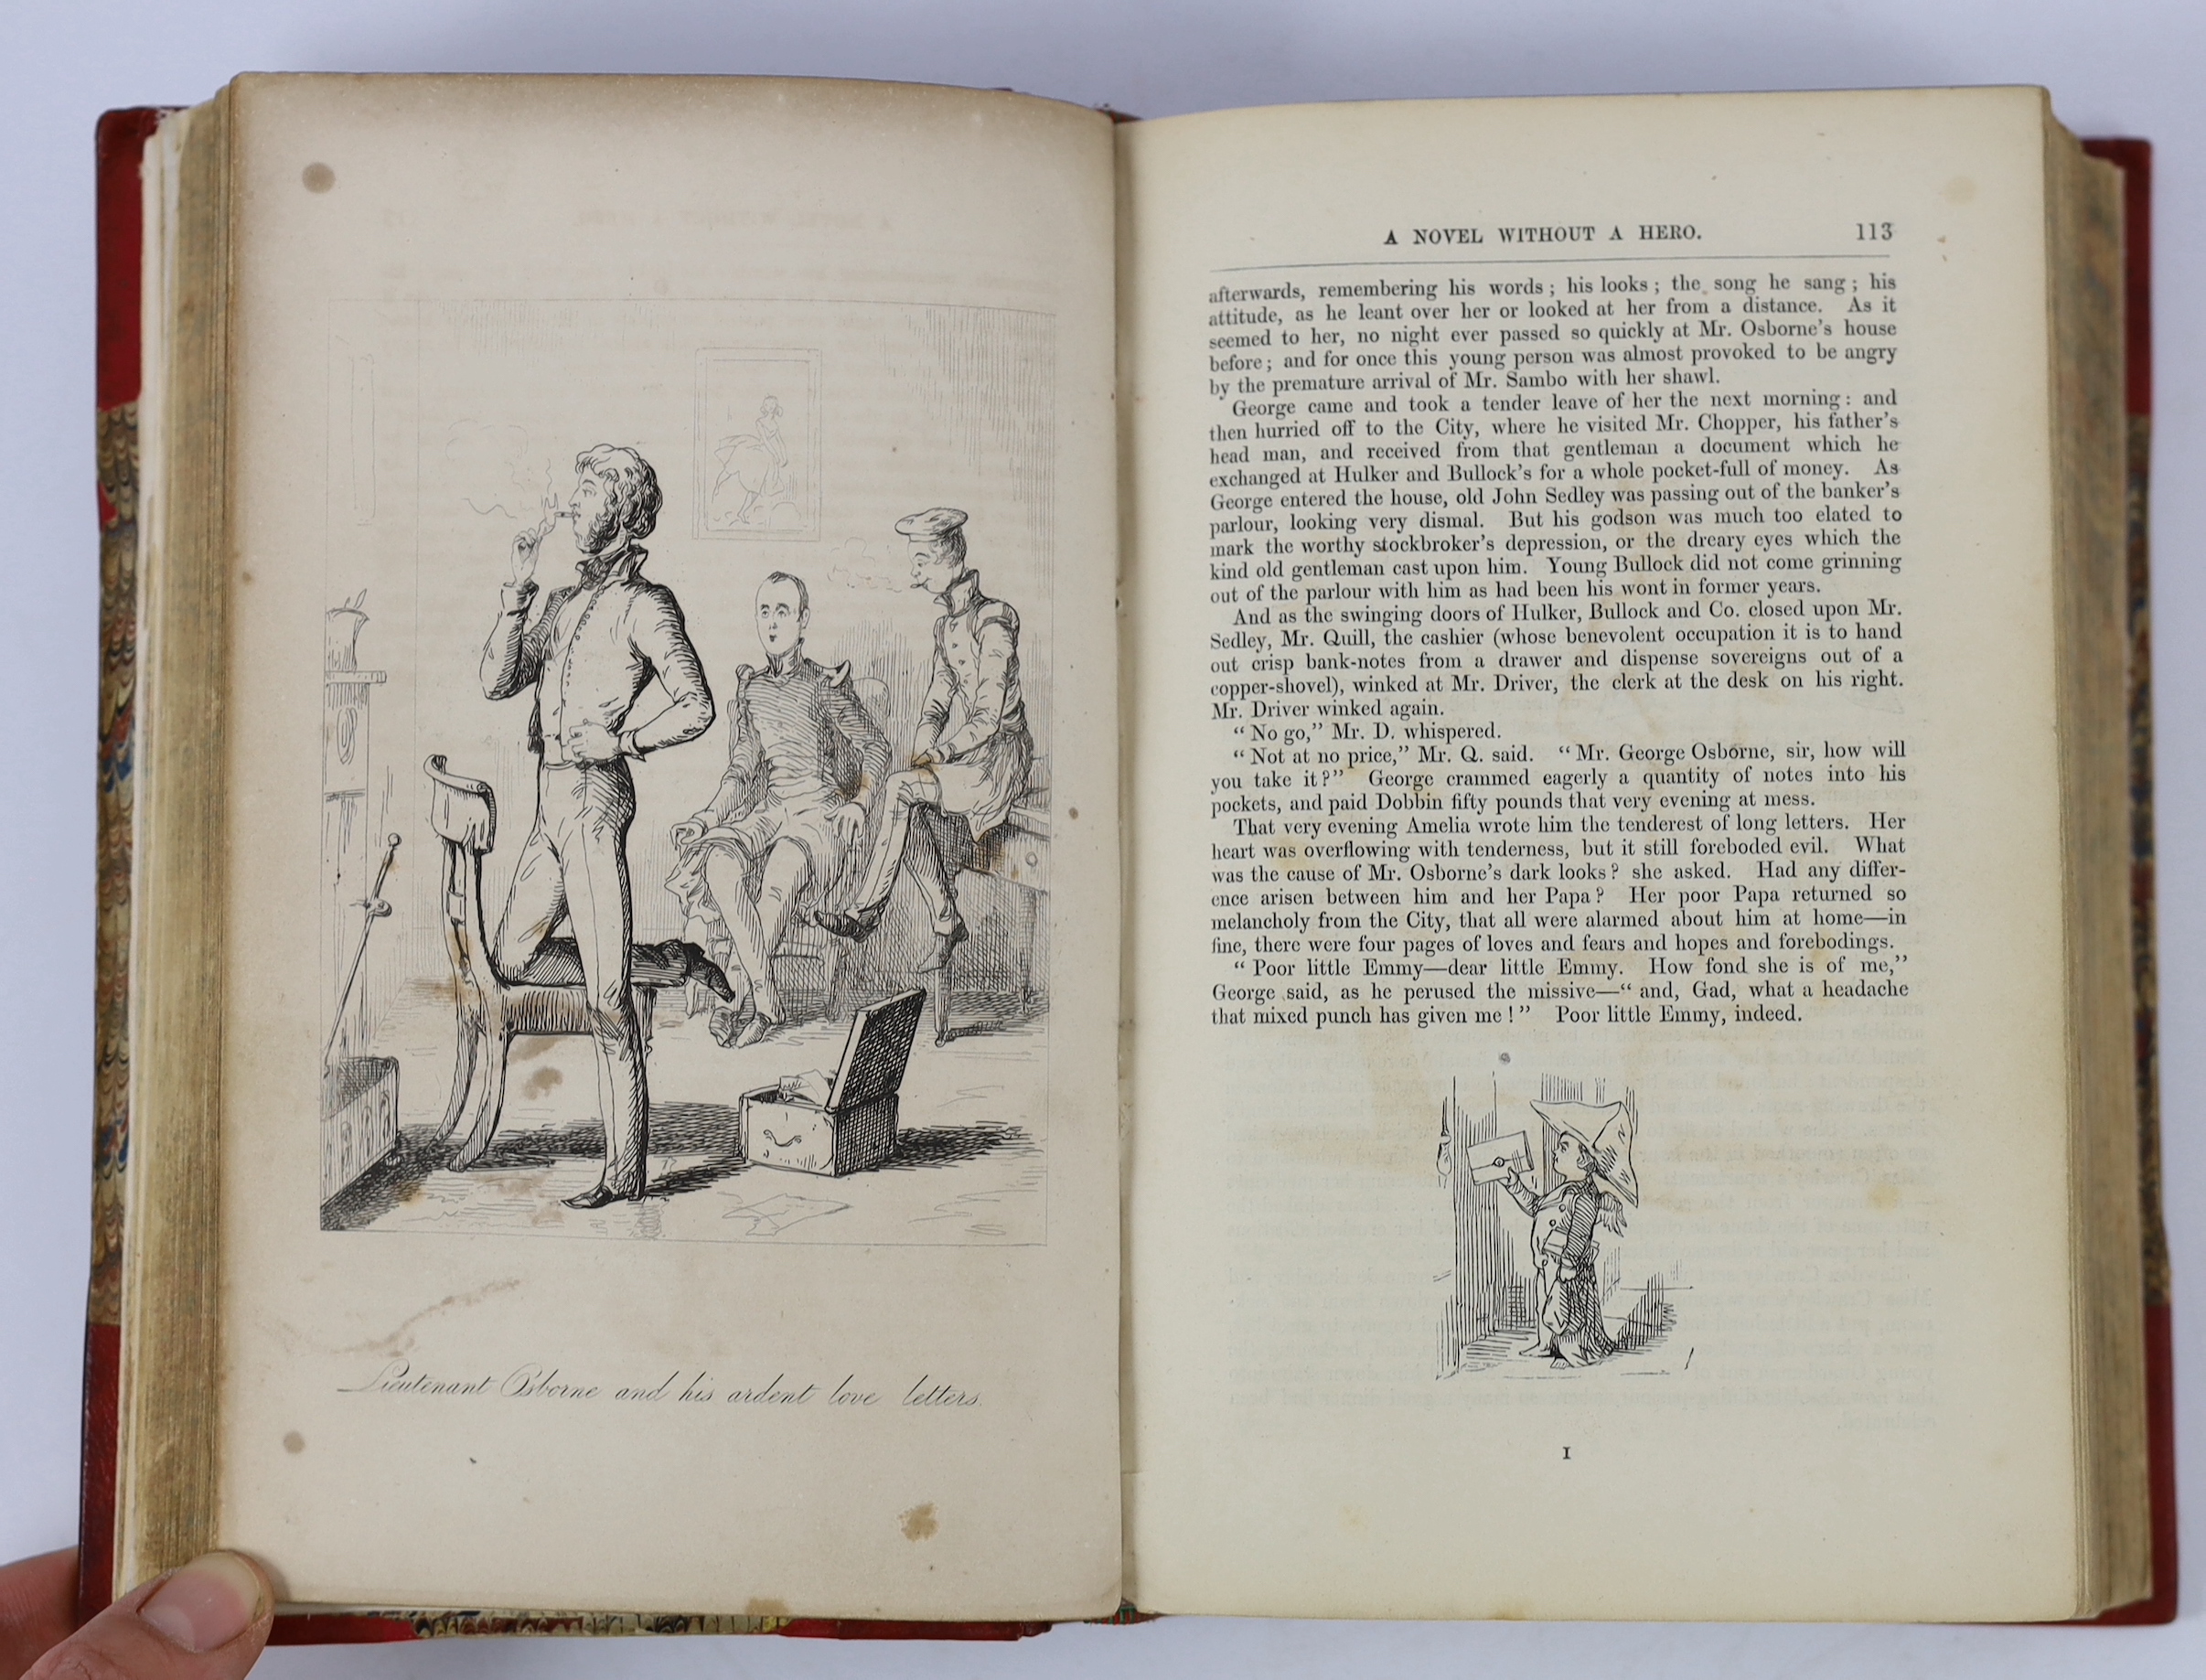 ° ° Thackeray, William Makepeace - Vanity Fair. A novel without a hero. First Edition. pictorial - Image 3 of 4